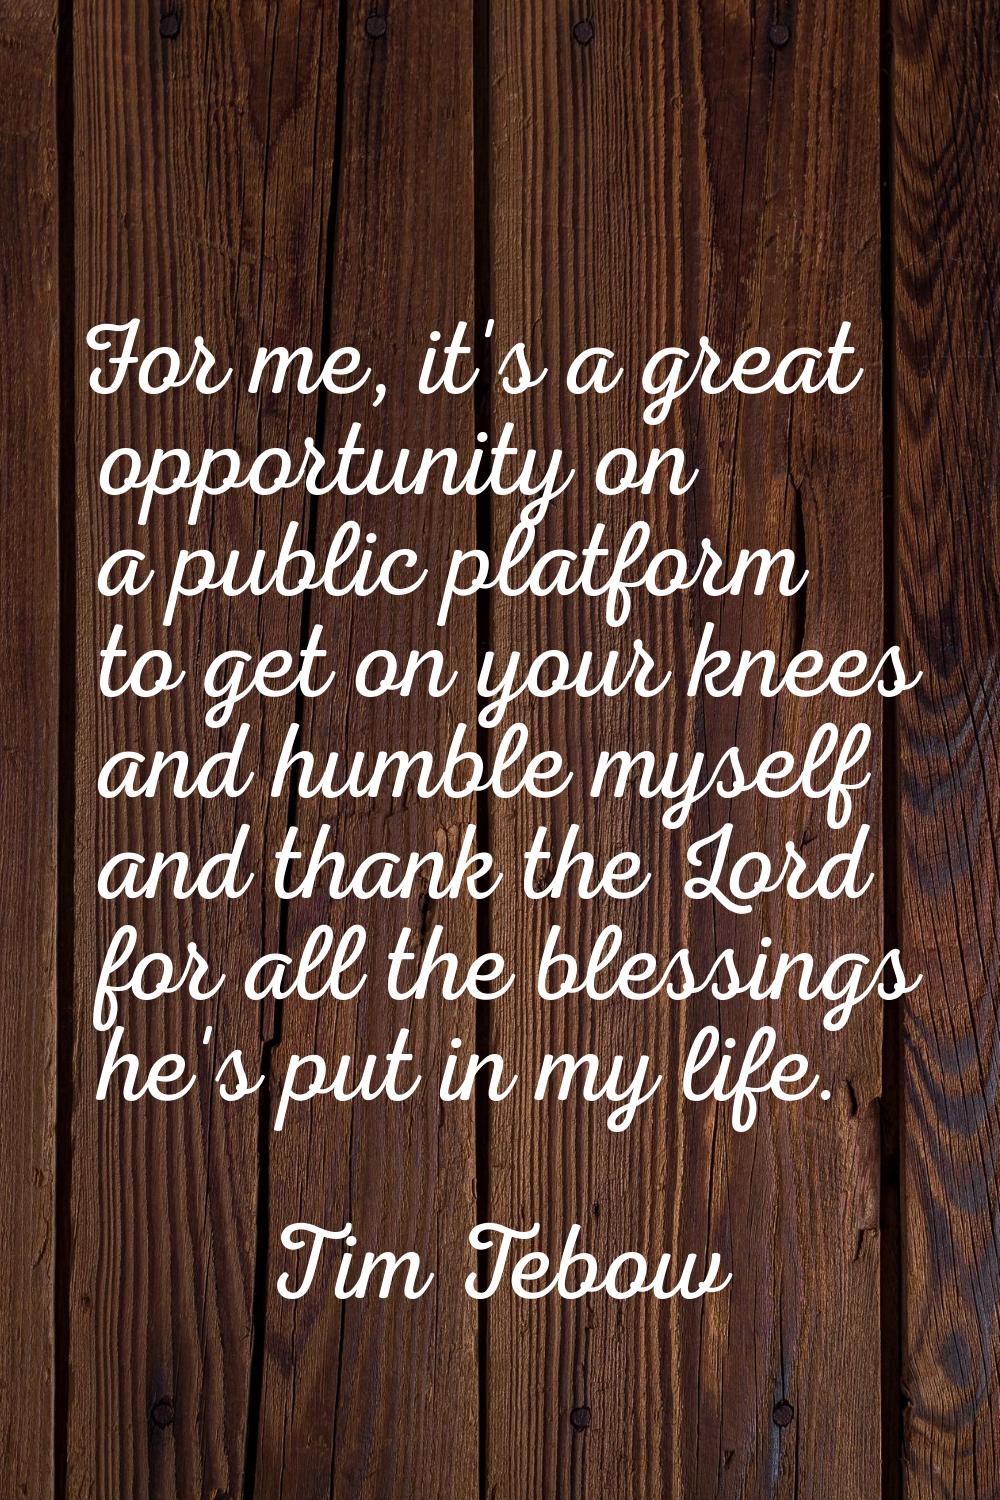 For me, it's a great opportunity on a public platform to get on your knees and humble myself and th